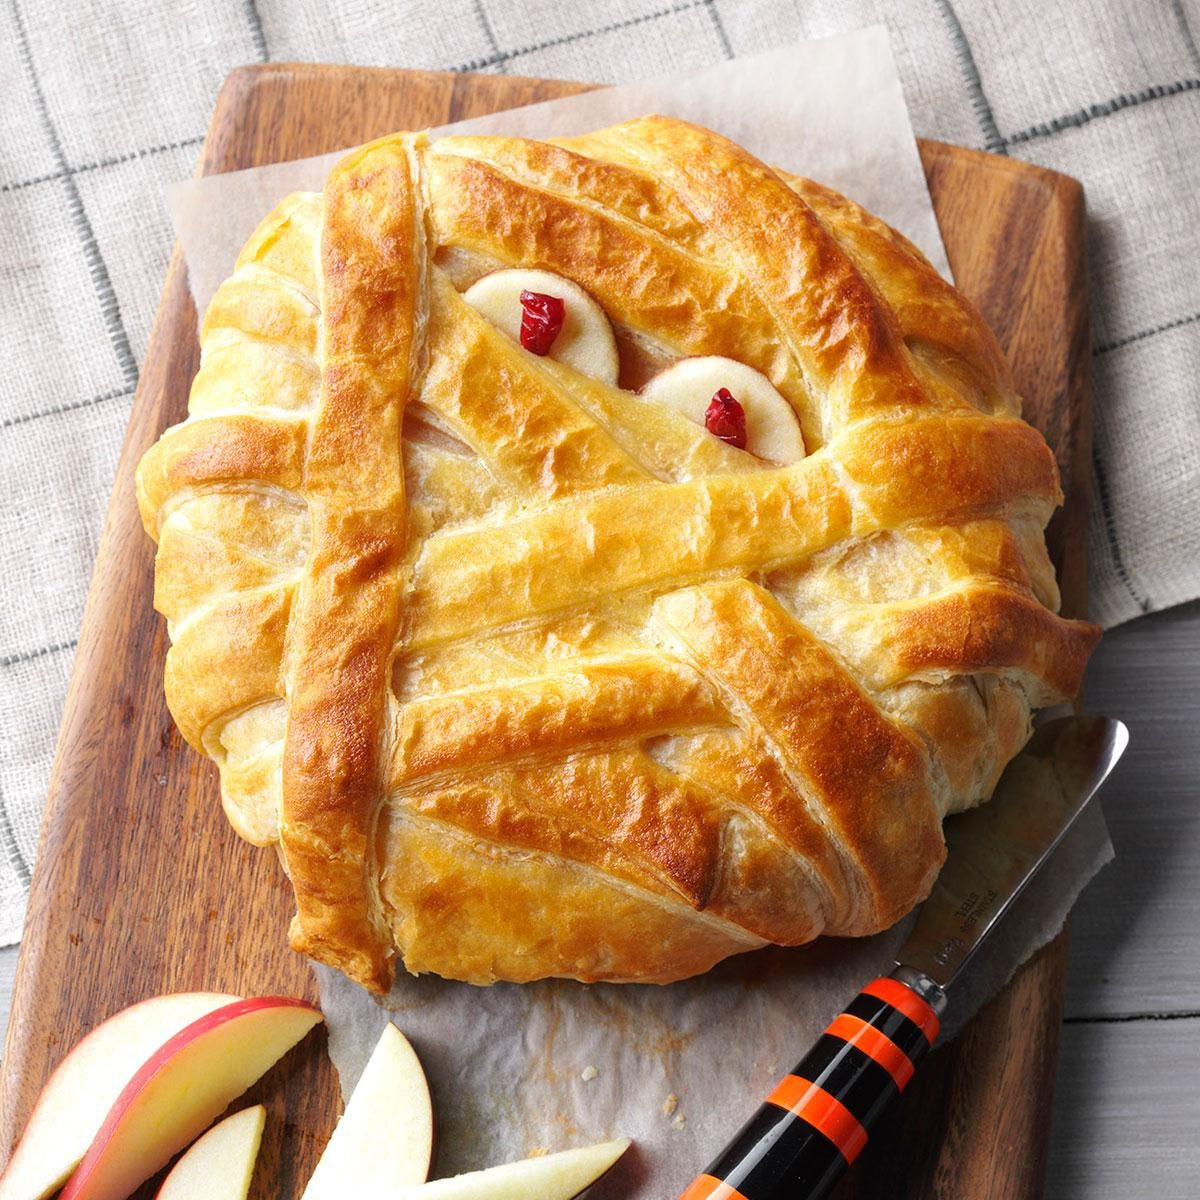 Halloween Main Dishes For Potluck
 58 Howling Good Potluck Recipes for Your Halloween Party